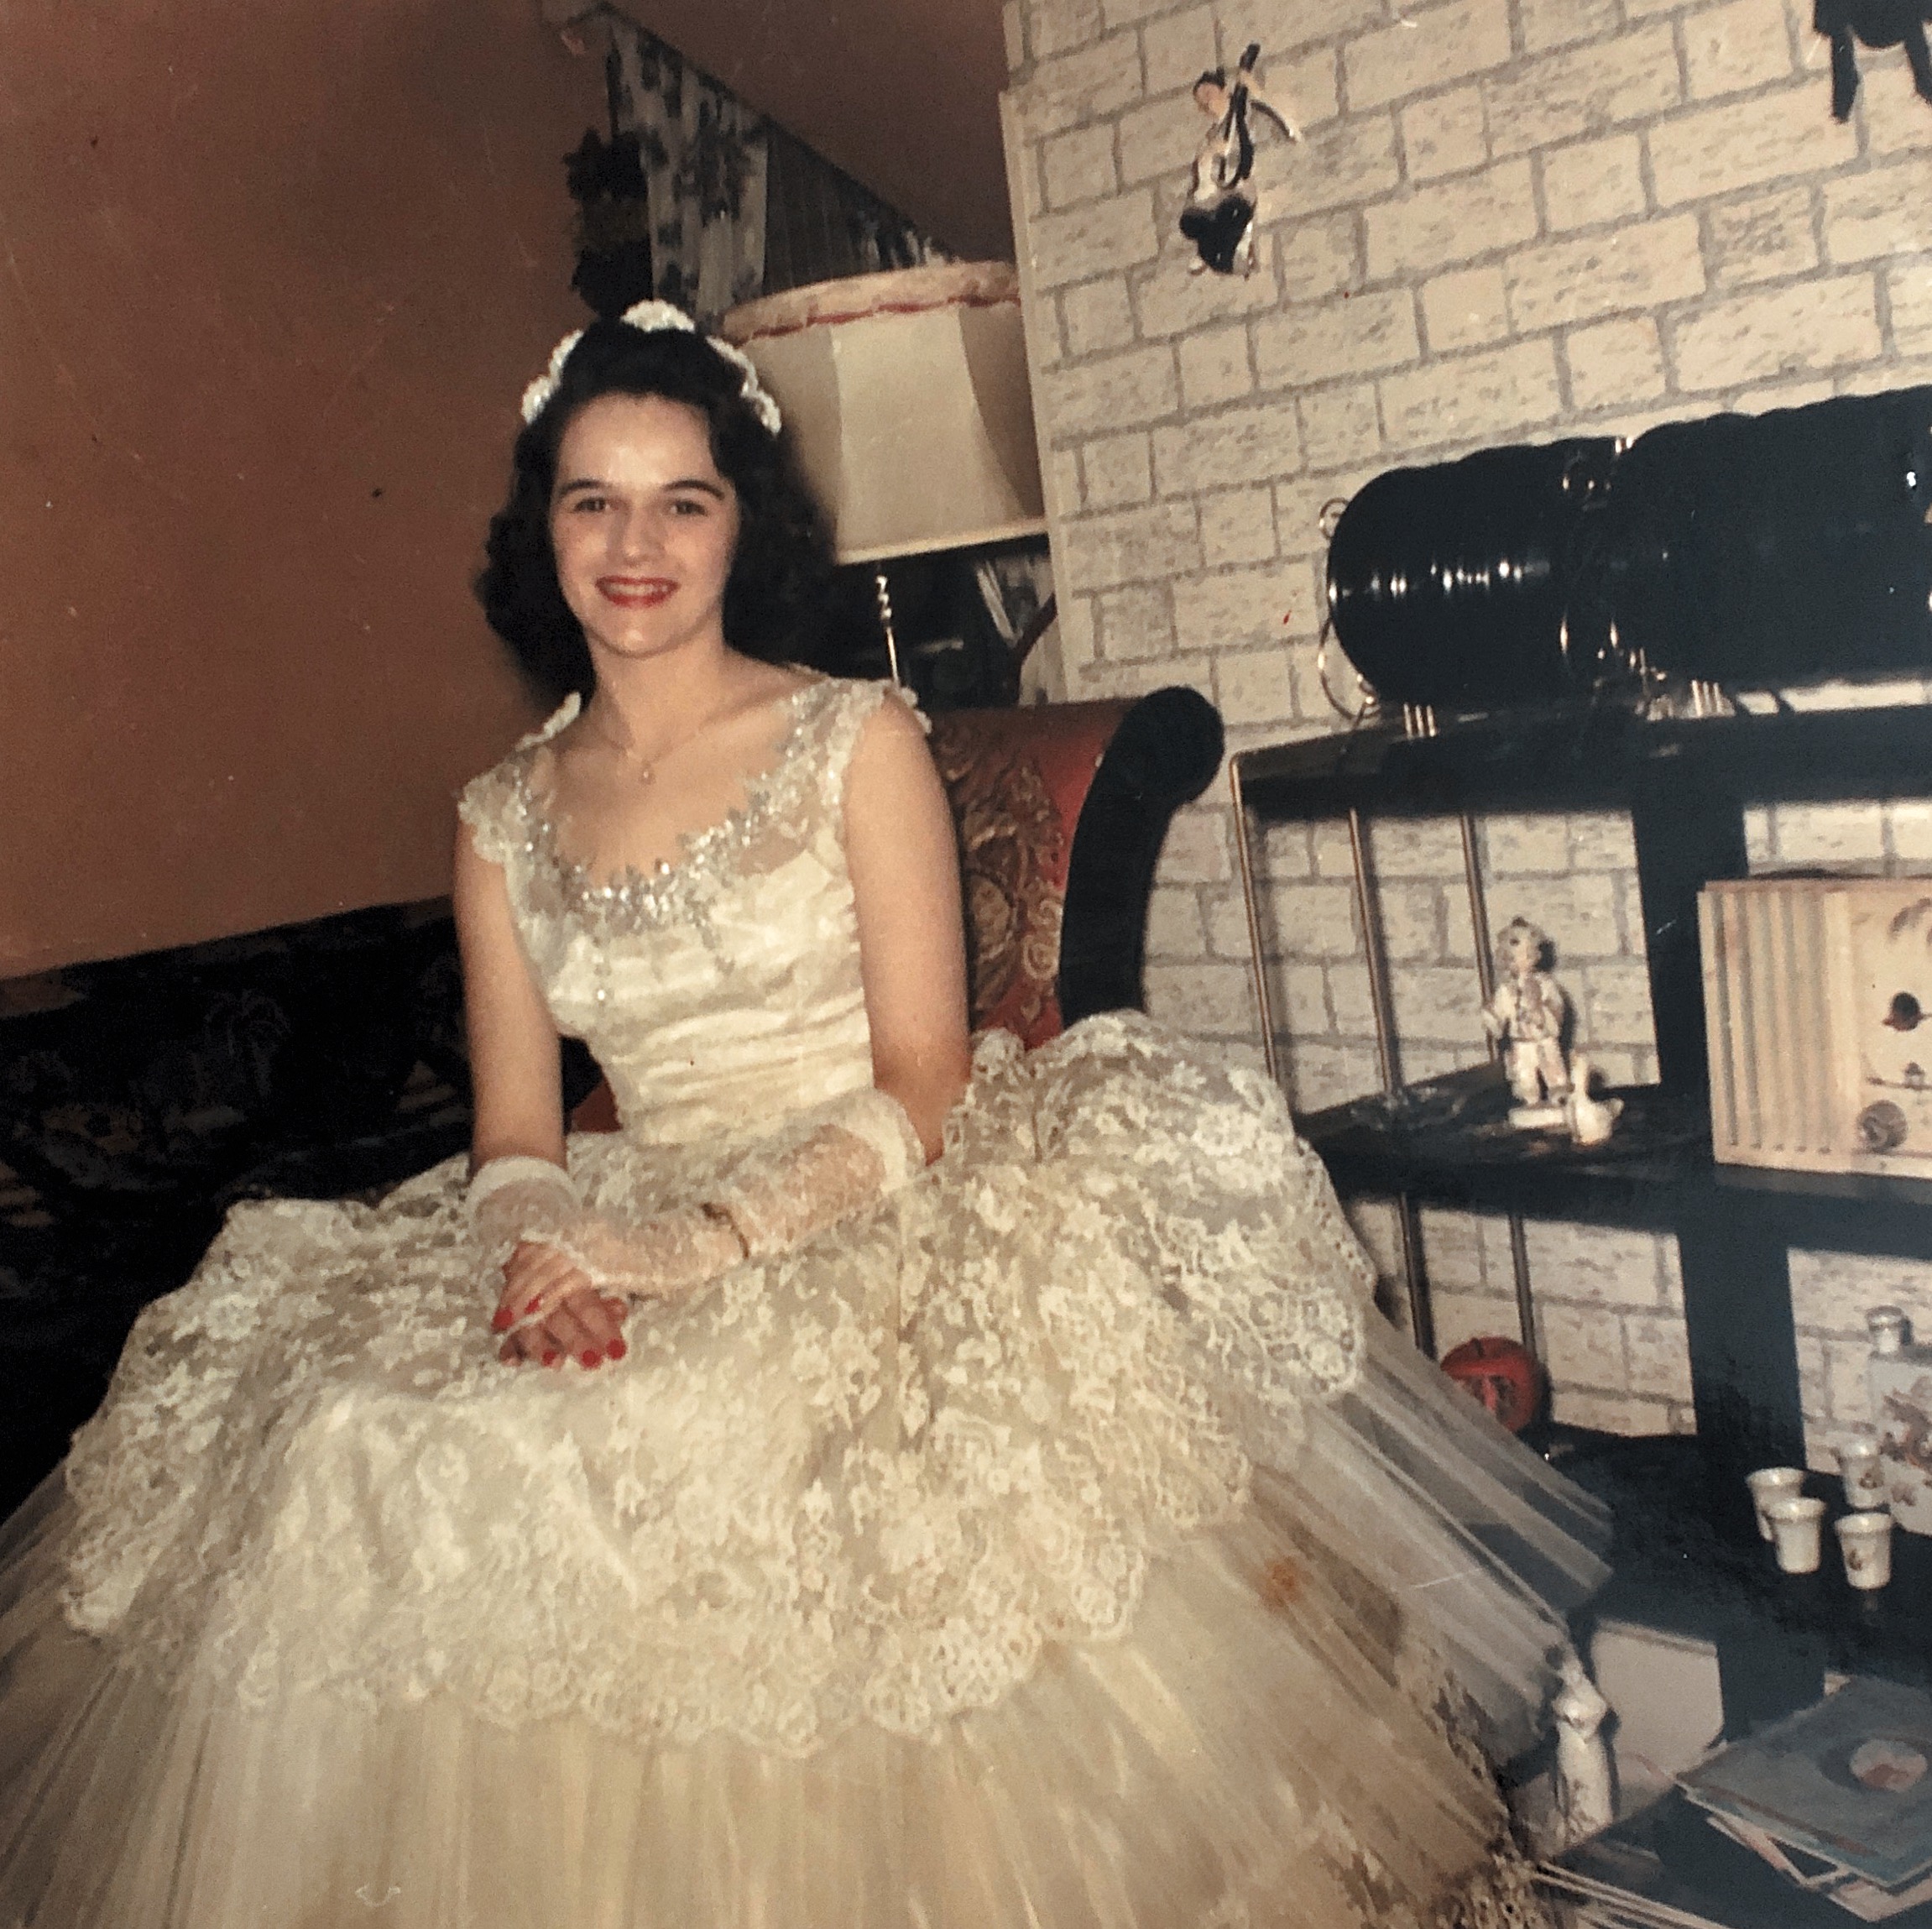 Peggy Gallagher 19 yrs old on pageant night Miss Atlantic City- she entered as Miss Jr. Chamber of Commerce. She bought the gown in NYC!